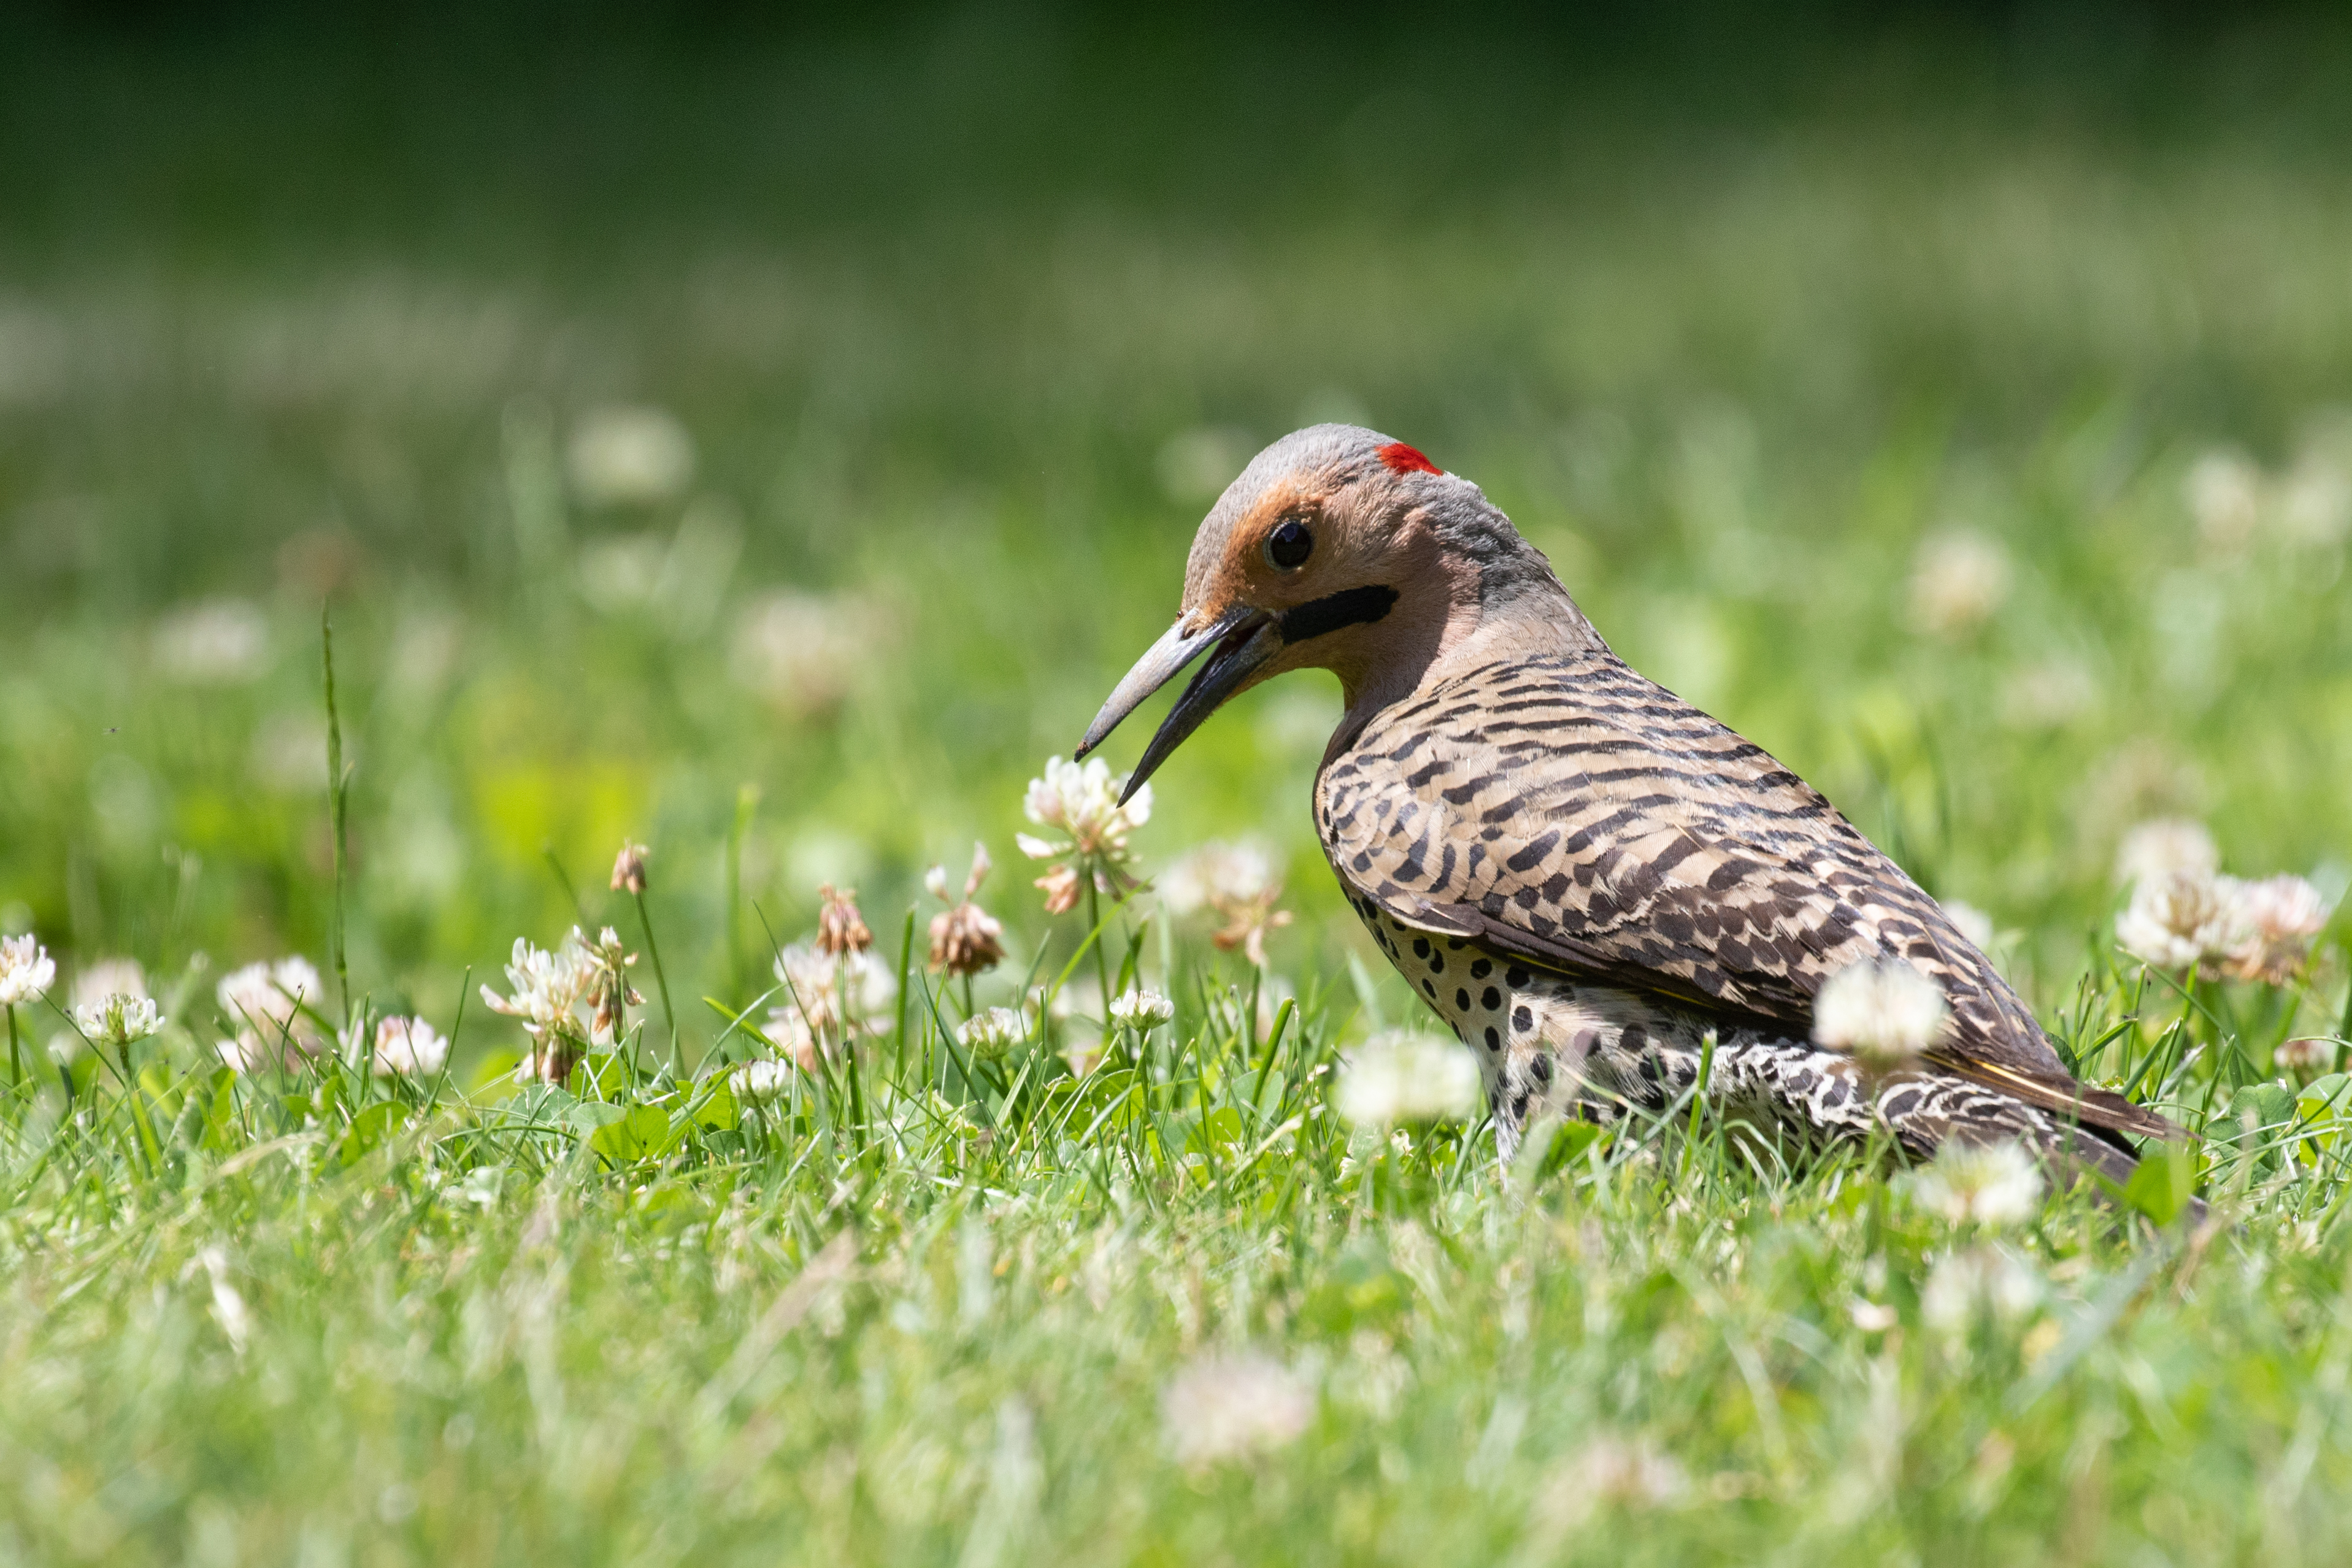 Northern Flickers pass through Central Park in large numbers during migration; a few regularly stay to breed. Photo: <a href="https://www.flickr.com/photos/144871758@N05/" target="_blank">Ryan F. Mandelbaum</a>